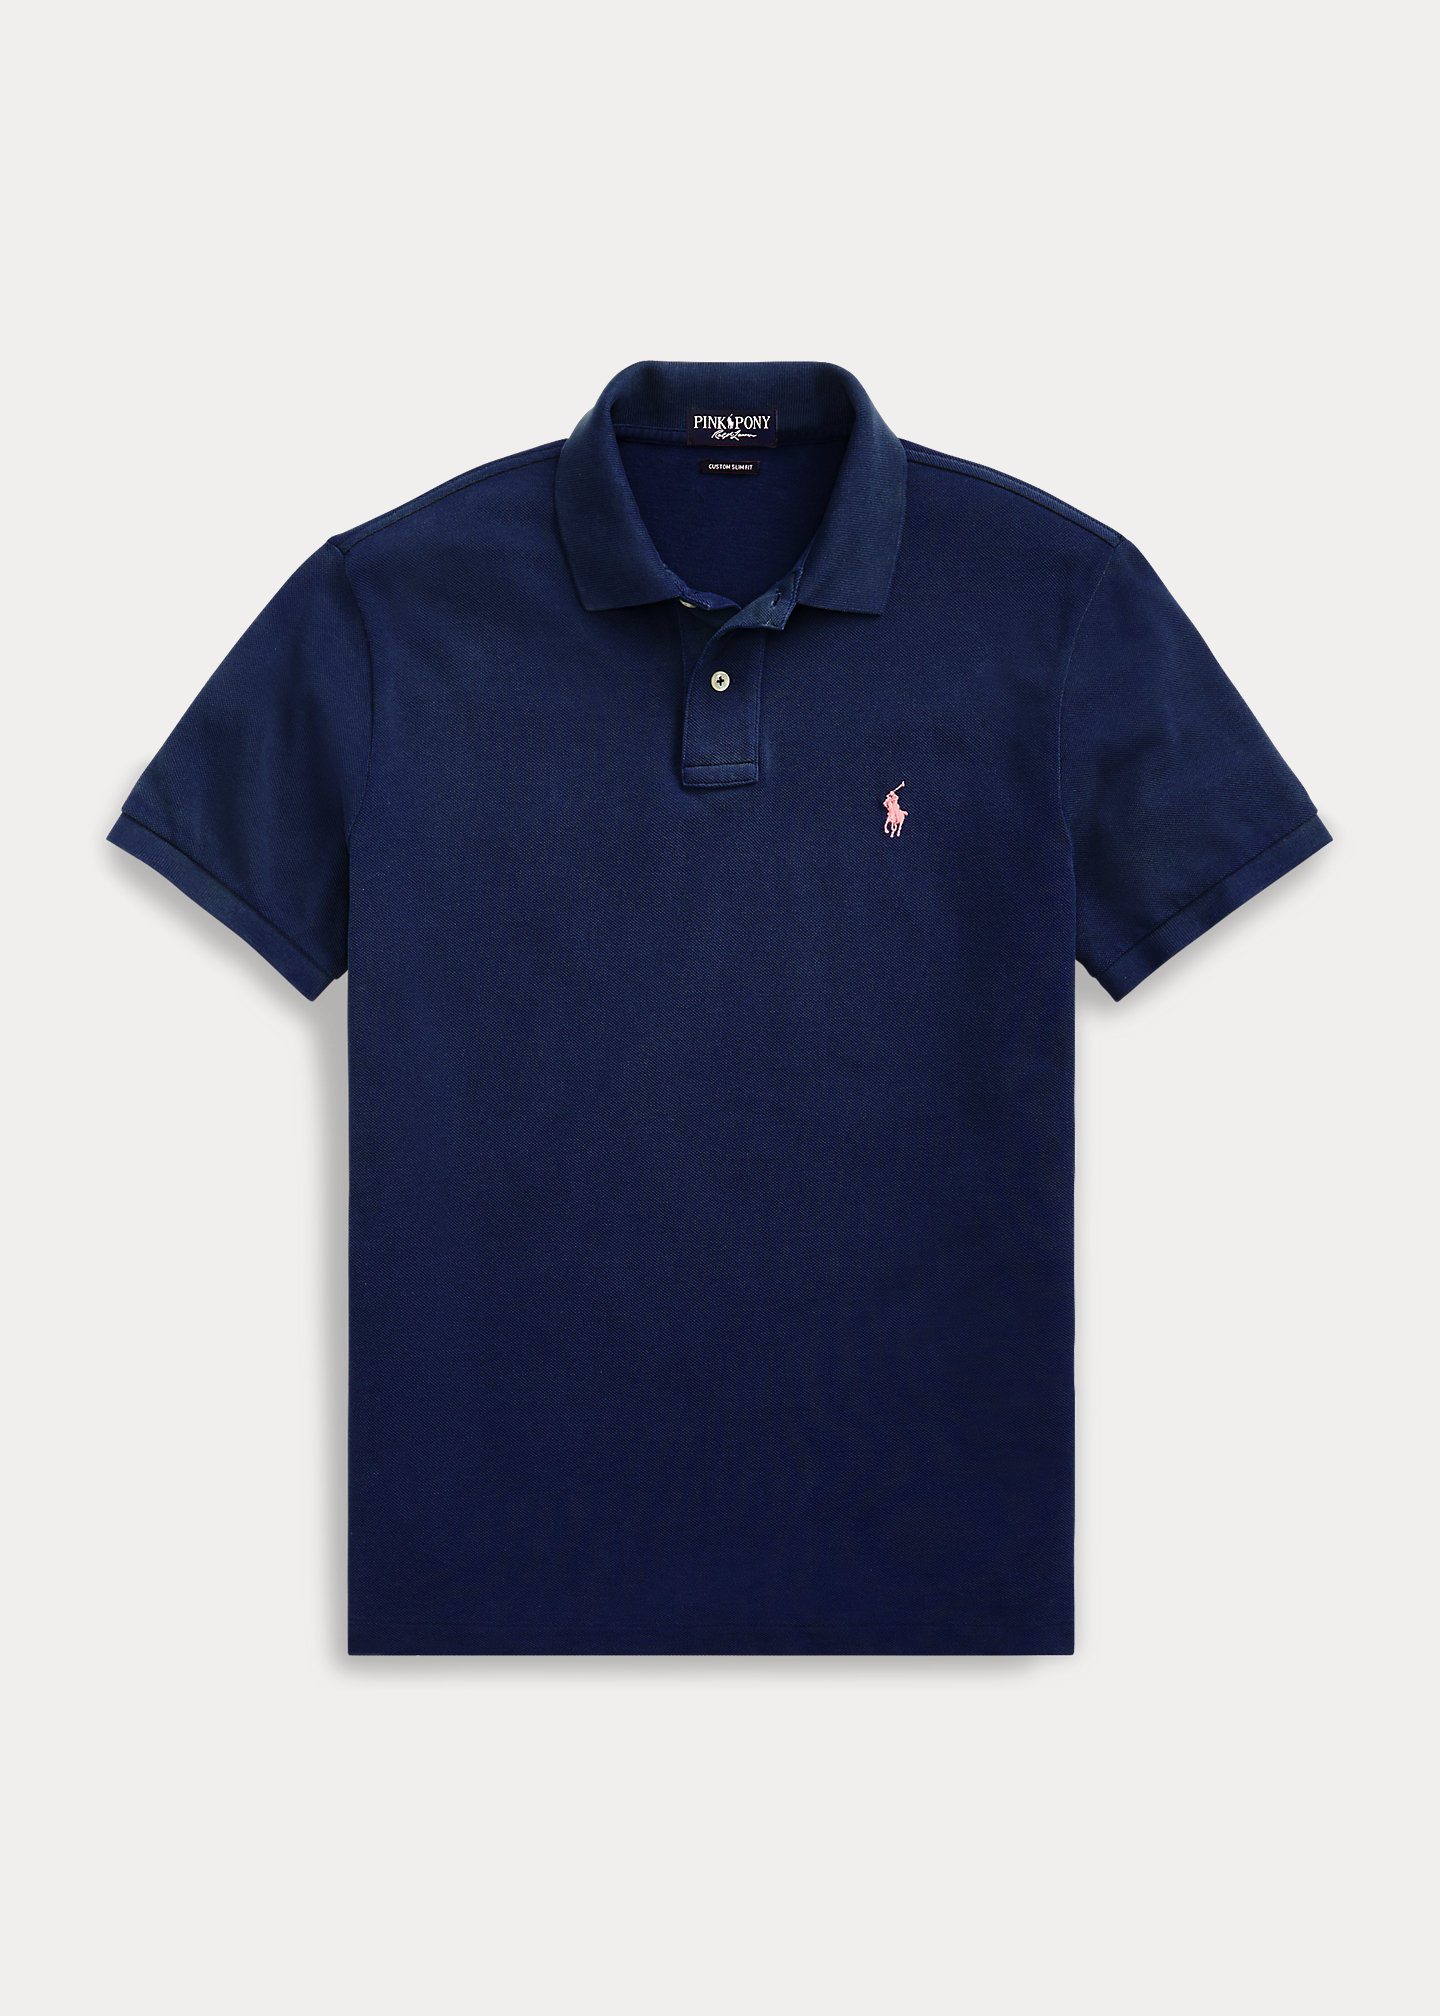 Ralph Lauren Slim Fit Polo Shirt - Online Auction Ghana : New ,Used Goods &  Products !